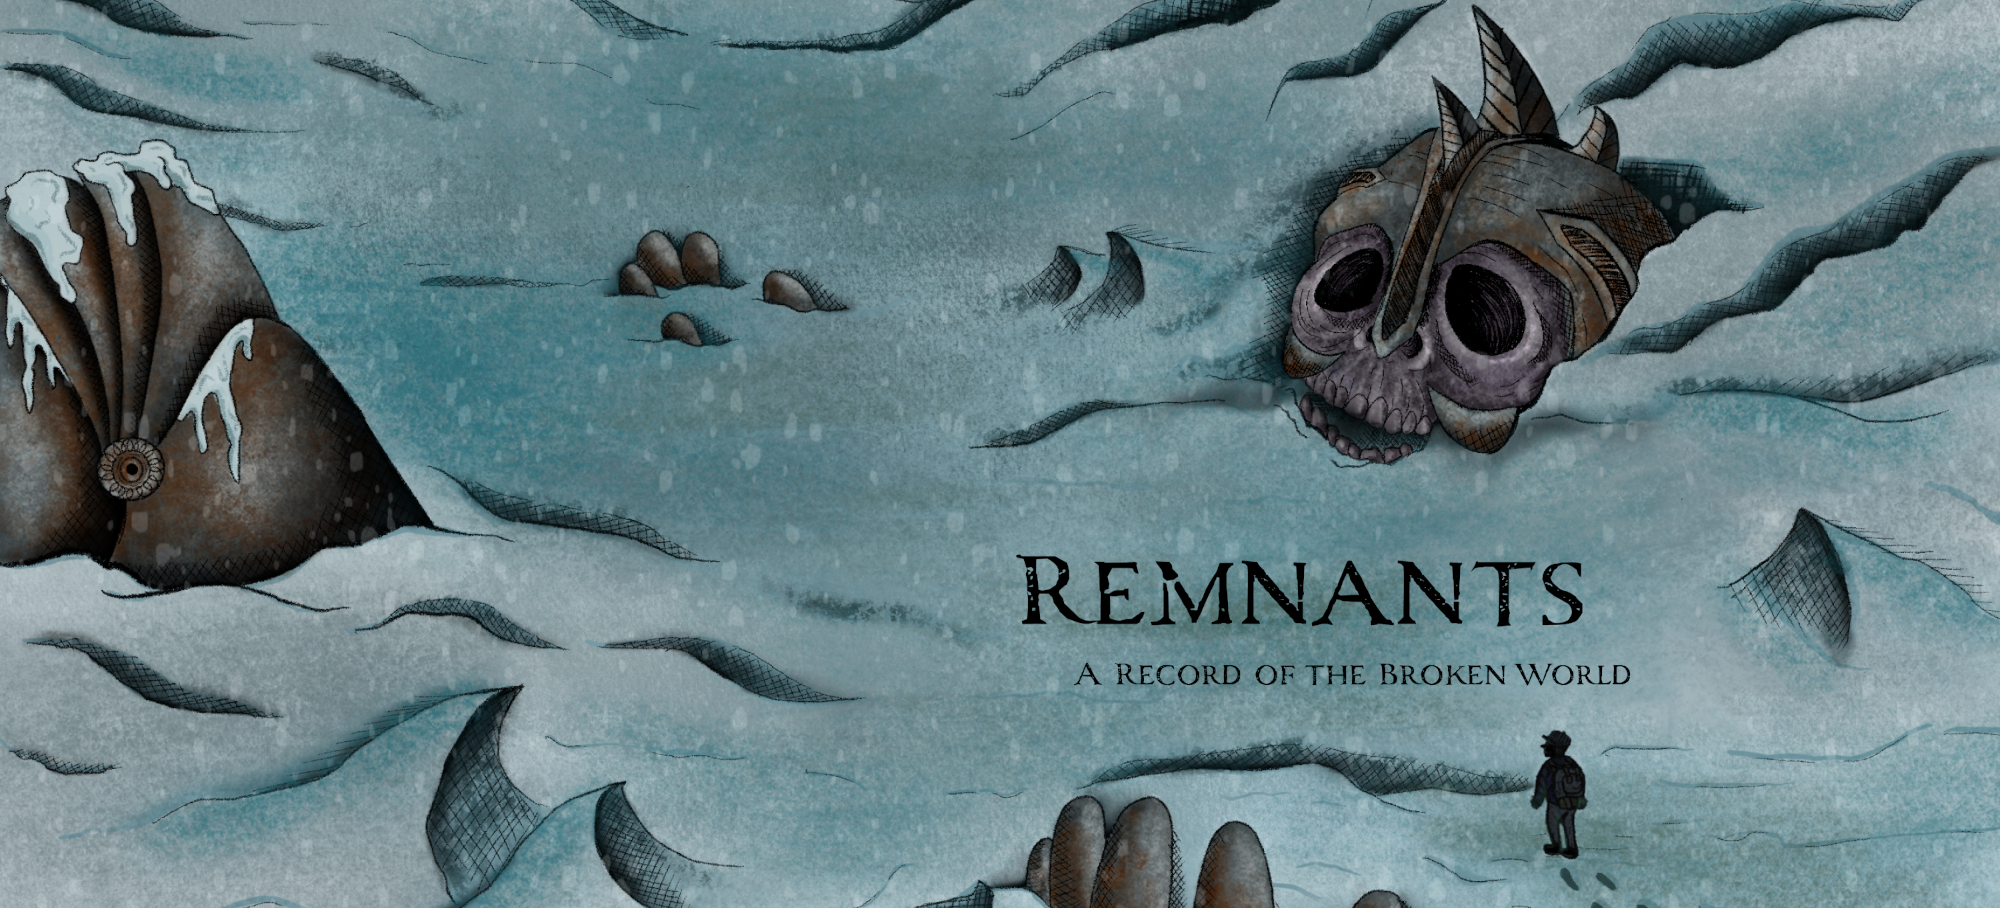 Remnants - A Record of the Broken World